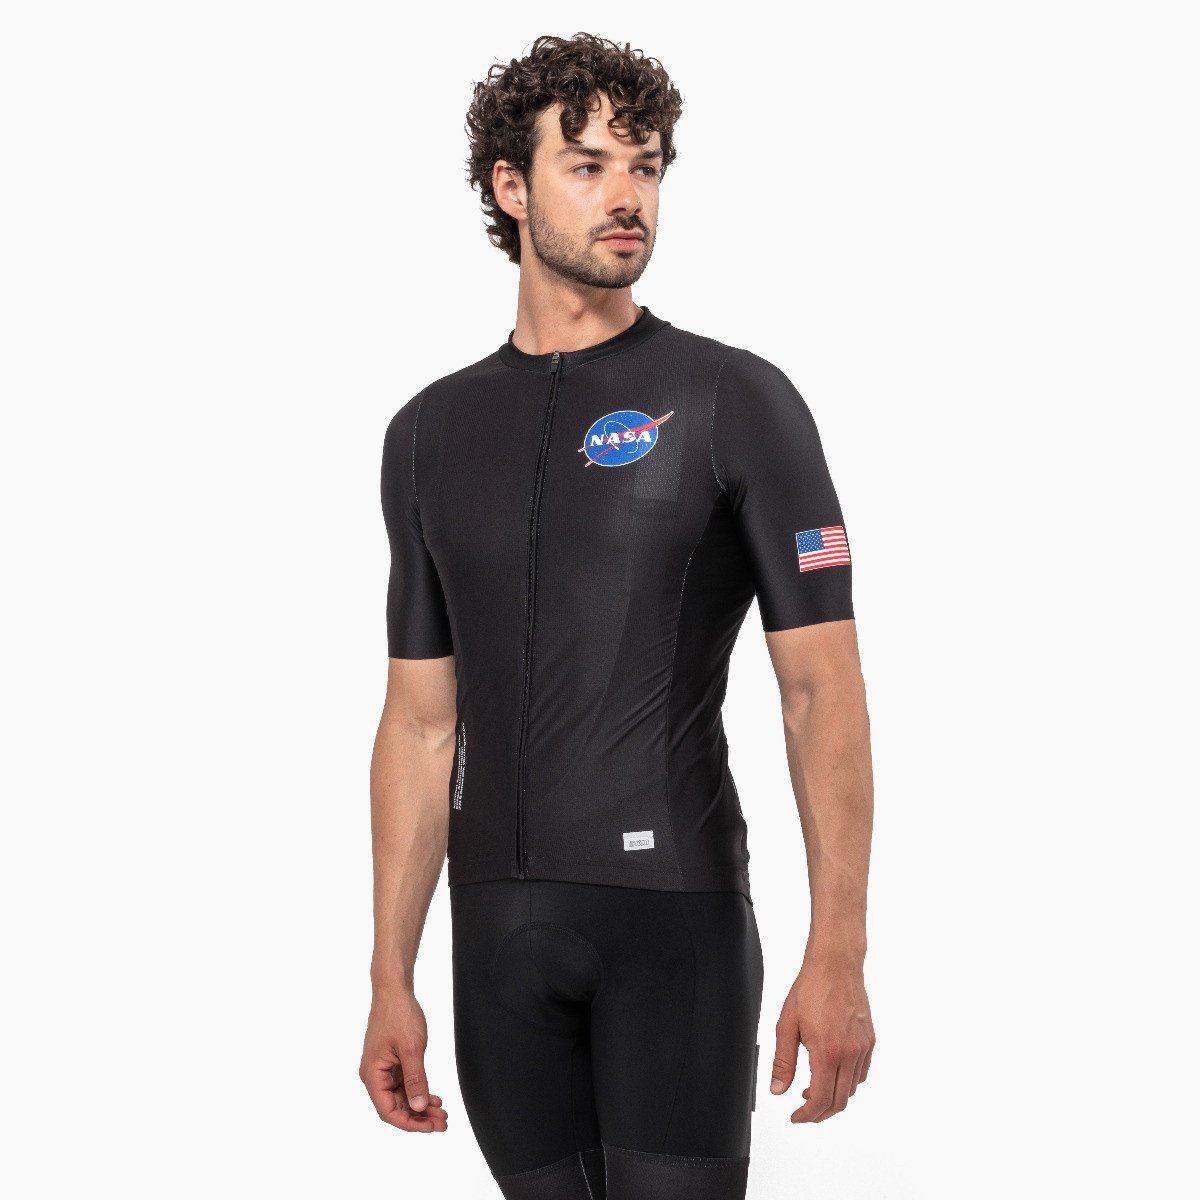 scicon space agency cycling clothing jersey nasa 18